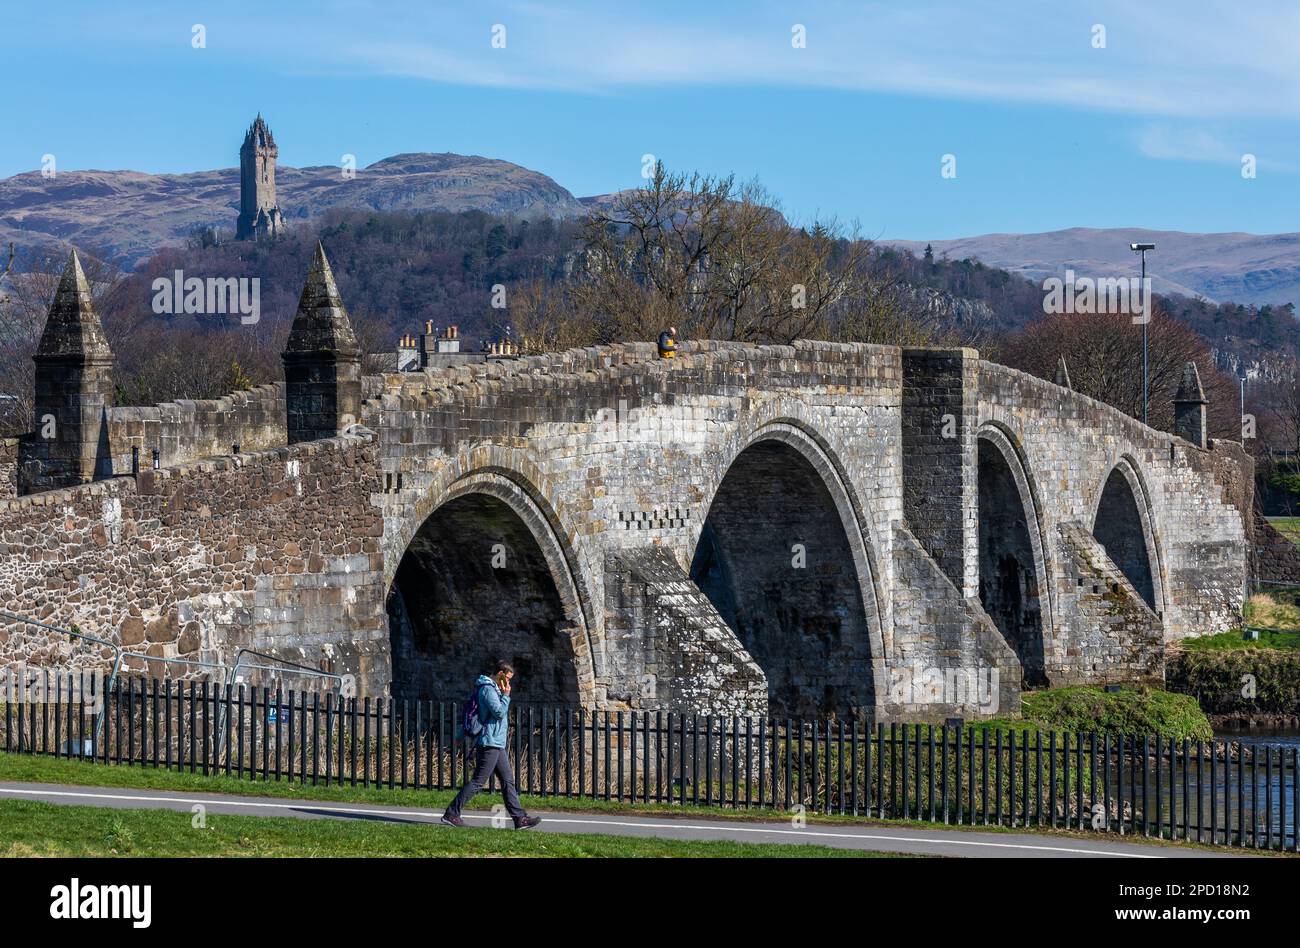 Stirling Old Bridge over the River Forth, with the Wallace Monument visible in the background, in the city of Stirling in Scotland Stock Photo